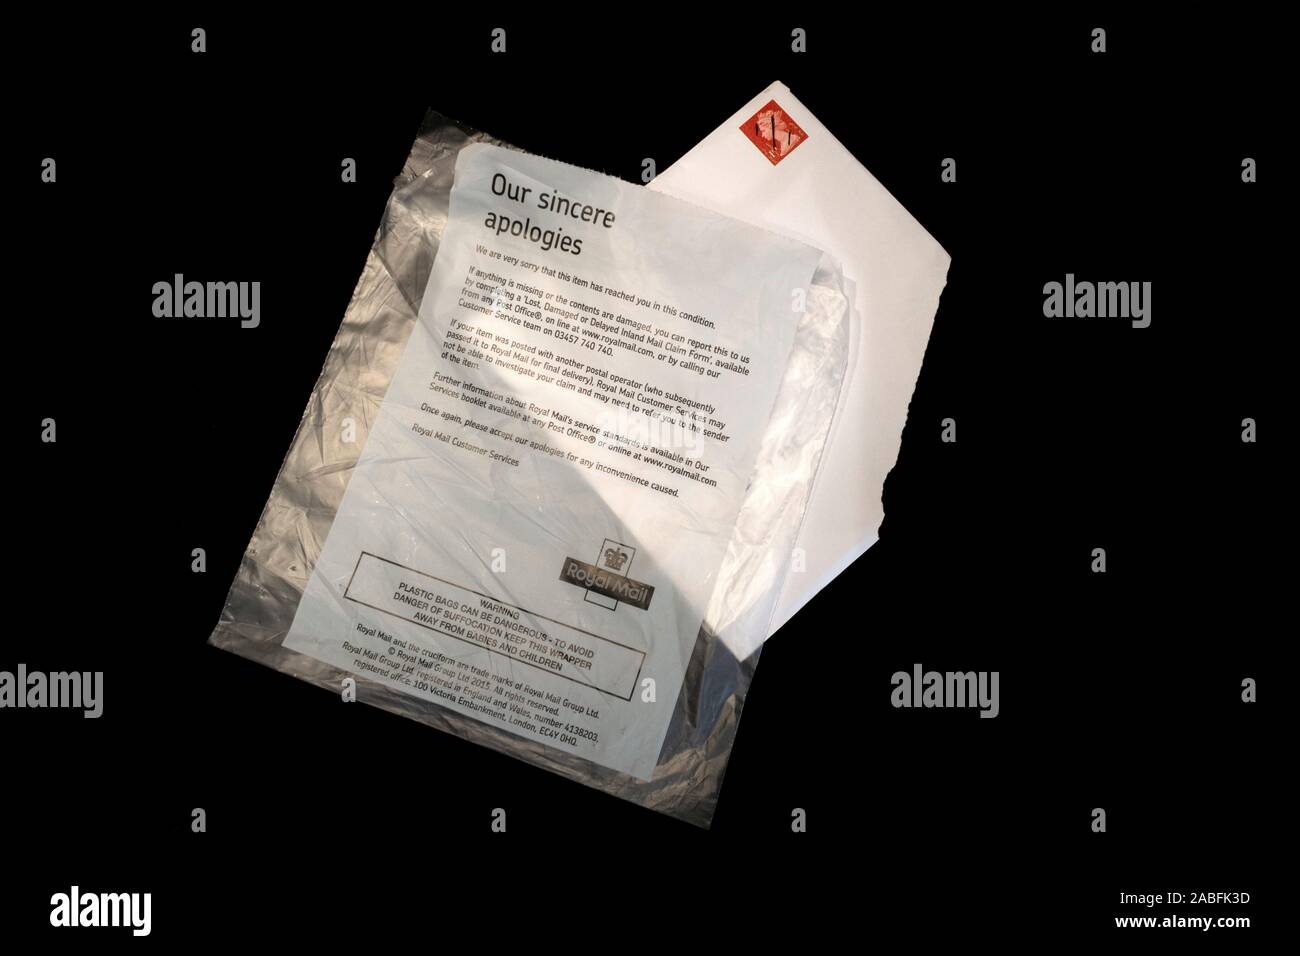 Royal Mail apology letter from the post office service. Letter, birthday card, damaged in transit by the Royal mail. Stock Photo